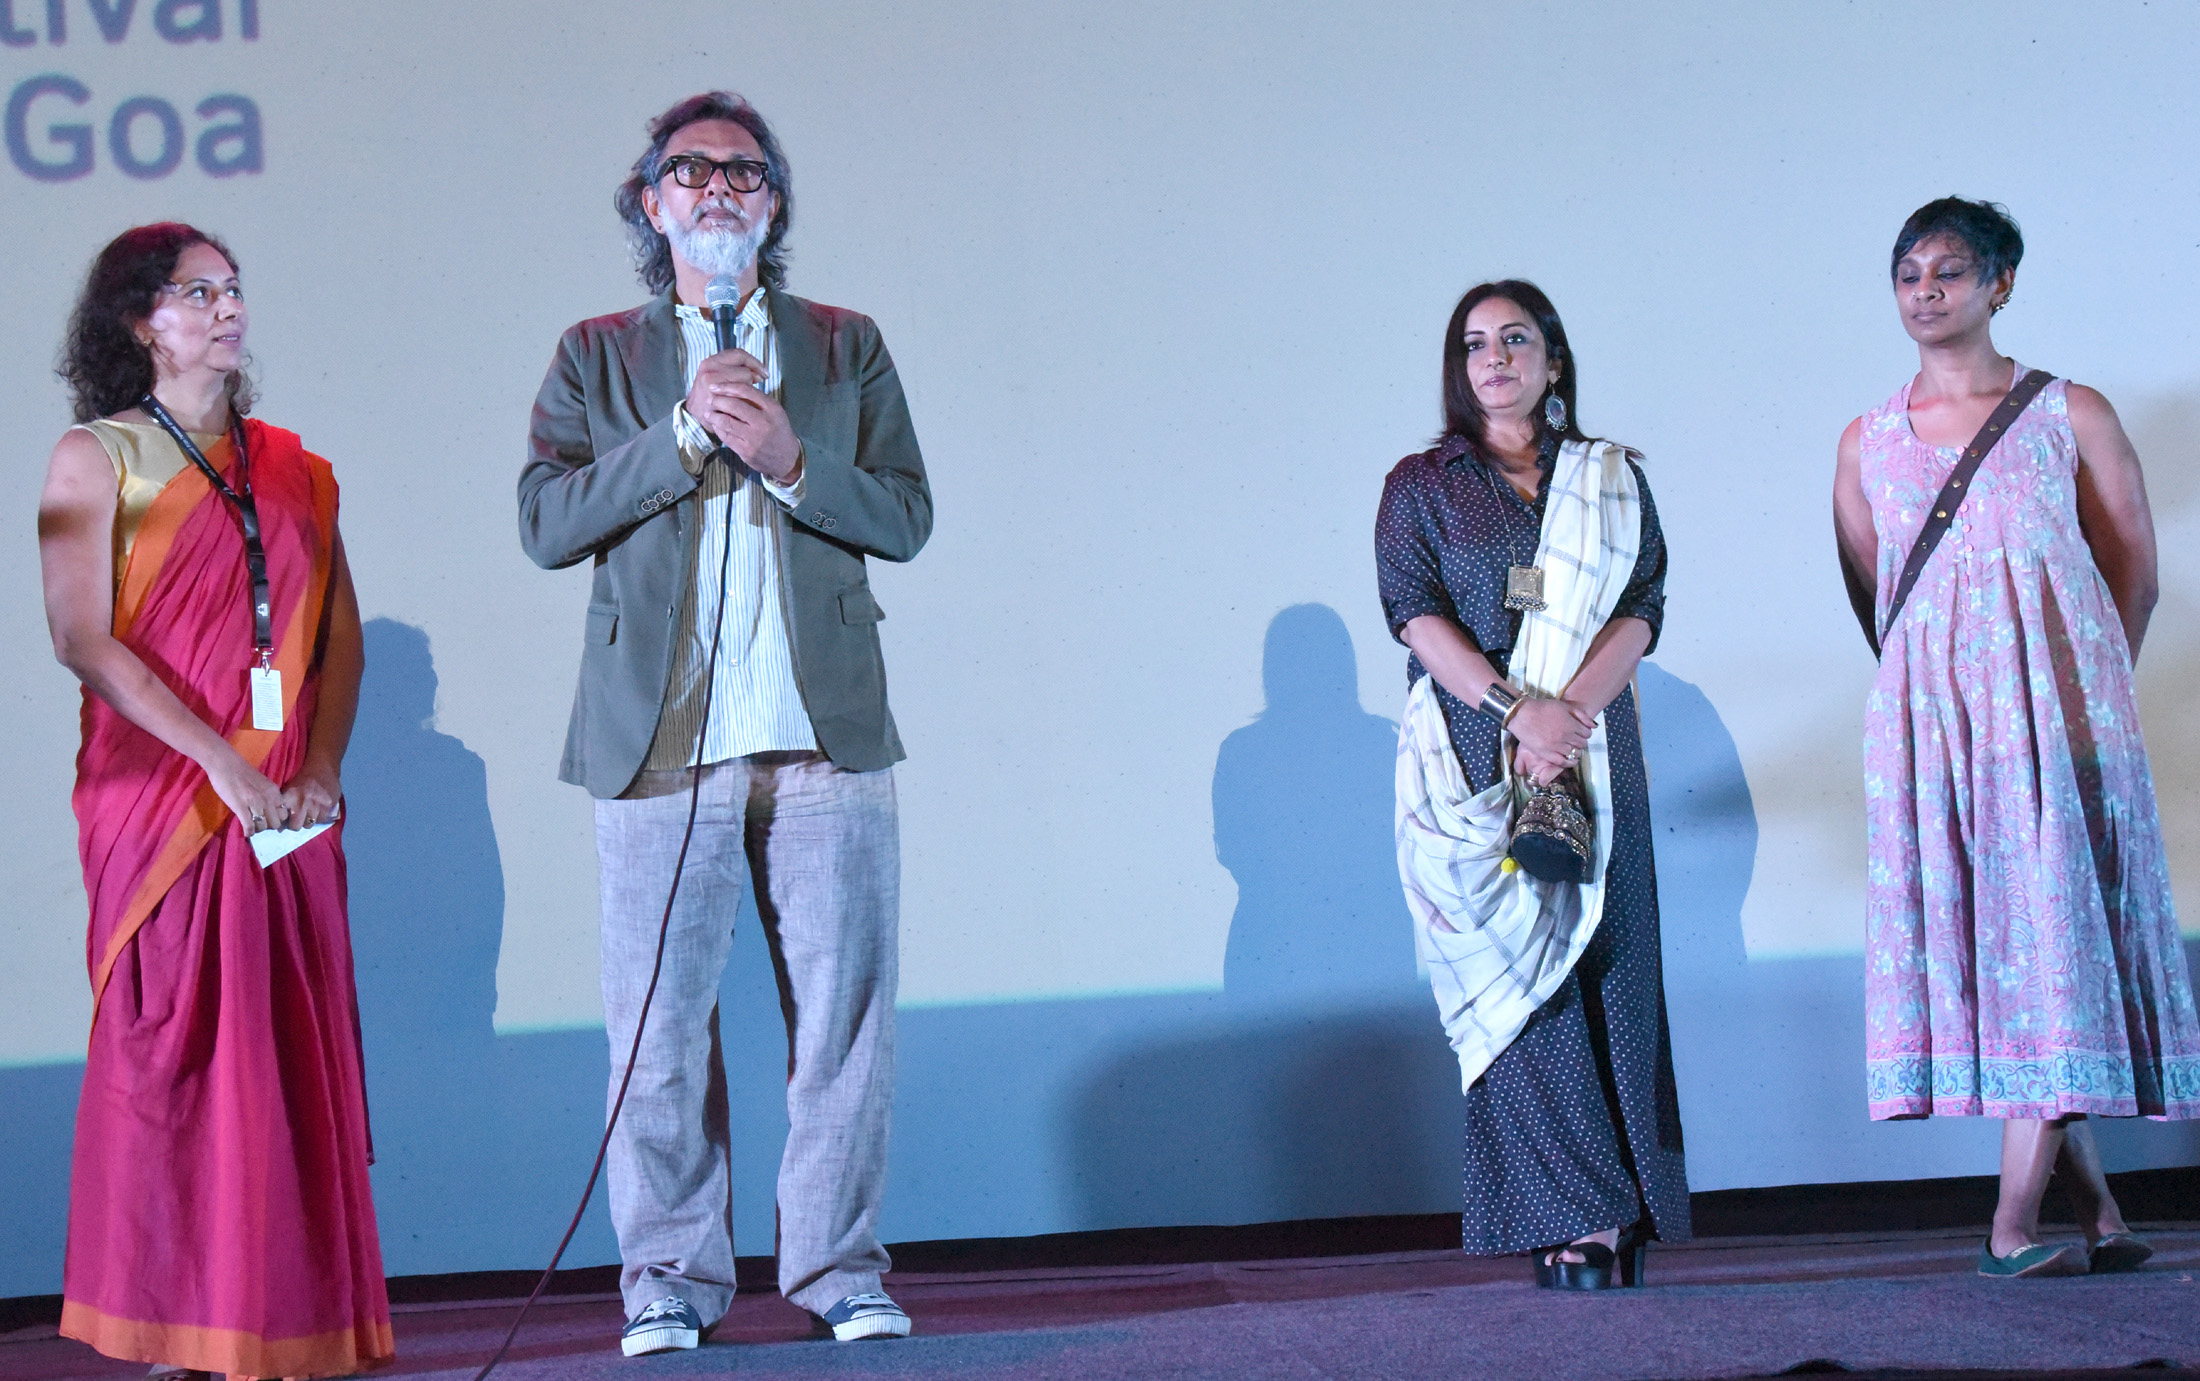 Sh. Rakyesh Om Prakash Mehra and Smt. Divya Dutta with others during the open air screening of Bhaag Milkha Bhaag.